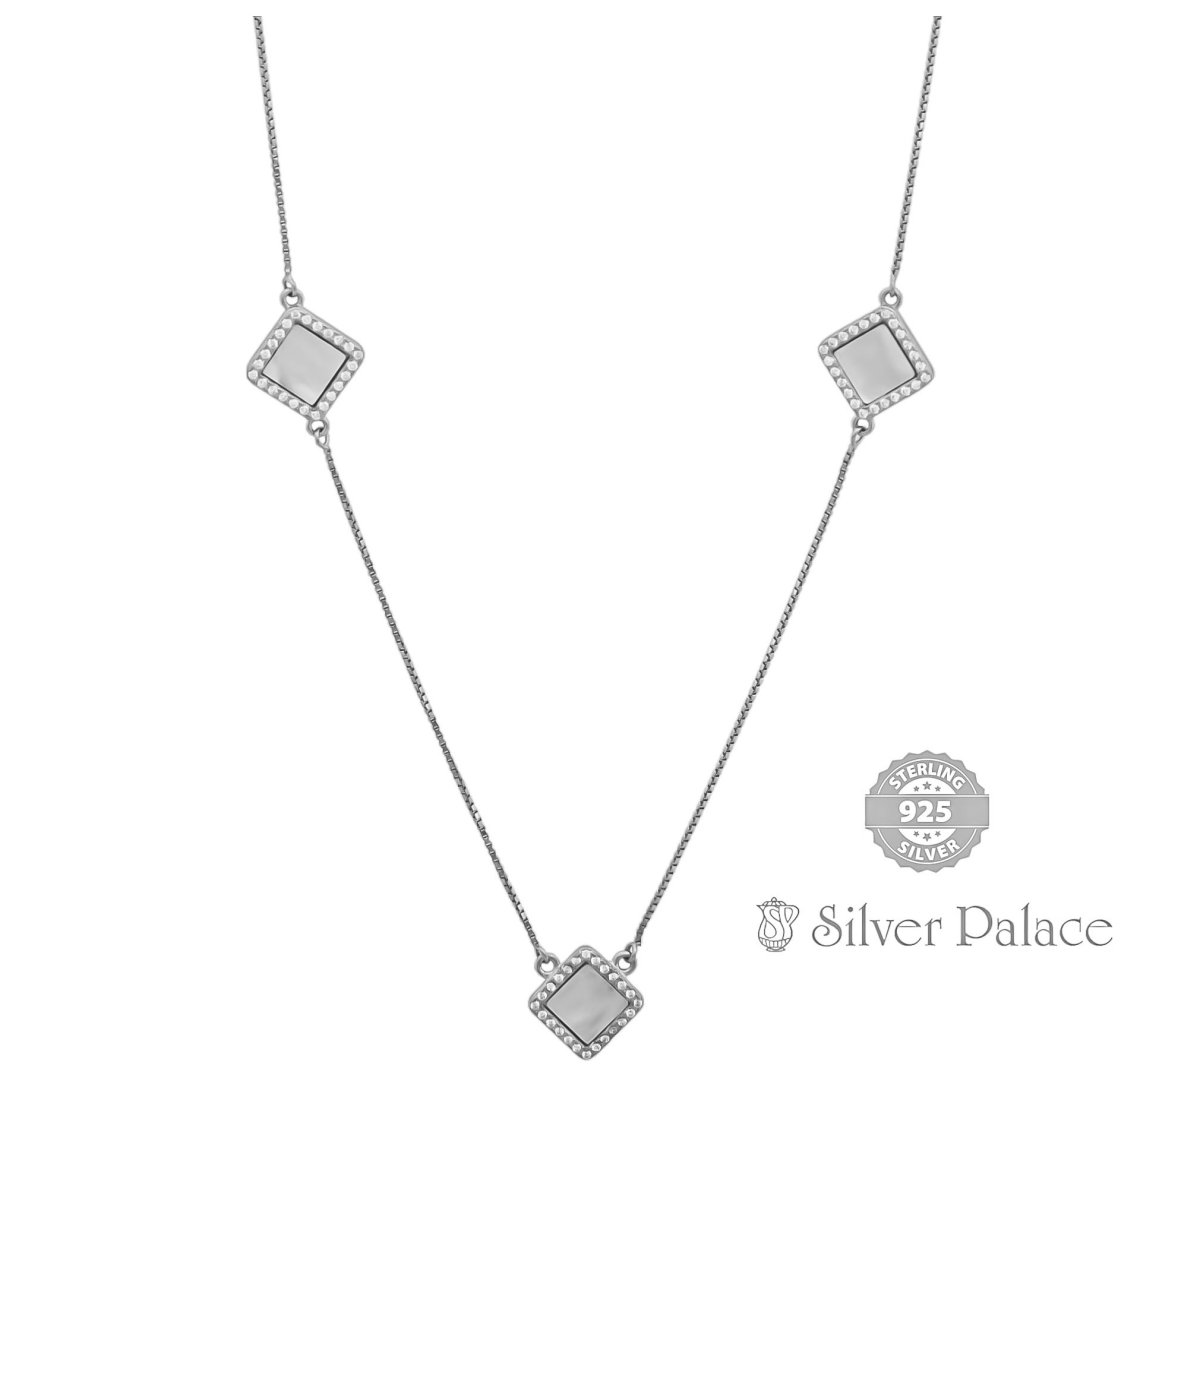 92.5 STERLING SILVER SQUARE DESIGN DESIGN CZ STONE STUDDED LW CHAIN FOR GIRLS